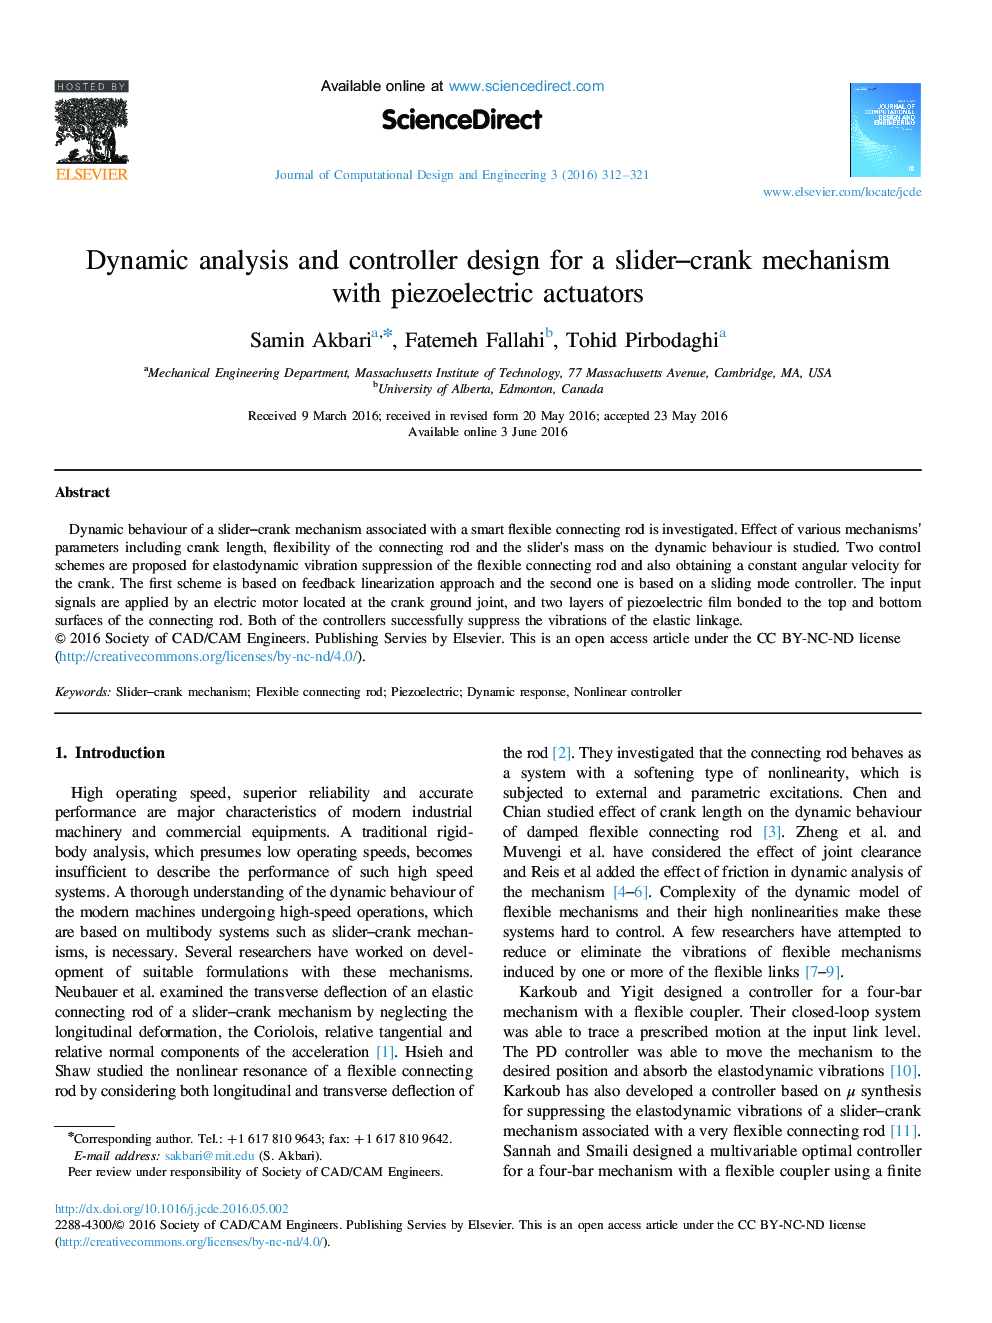 Dynamic analysis and controller design for a slider-crank mechanism with piezoelectric actuators